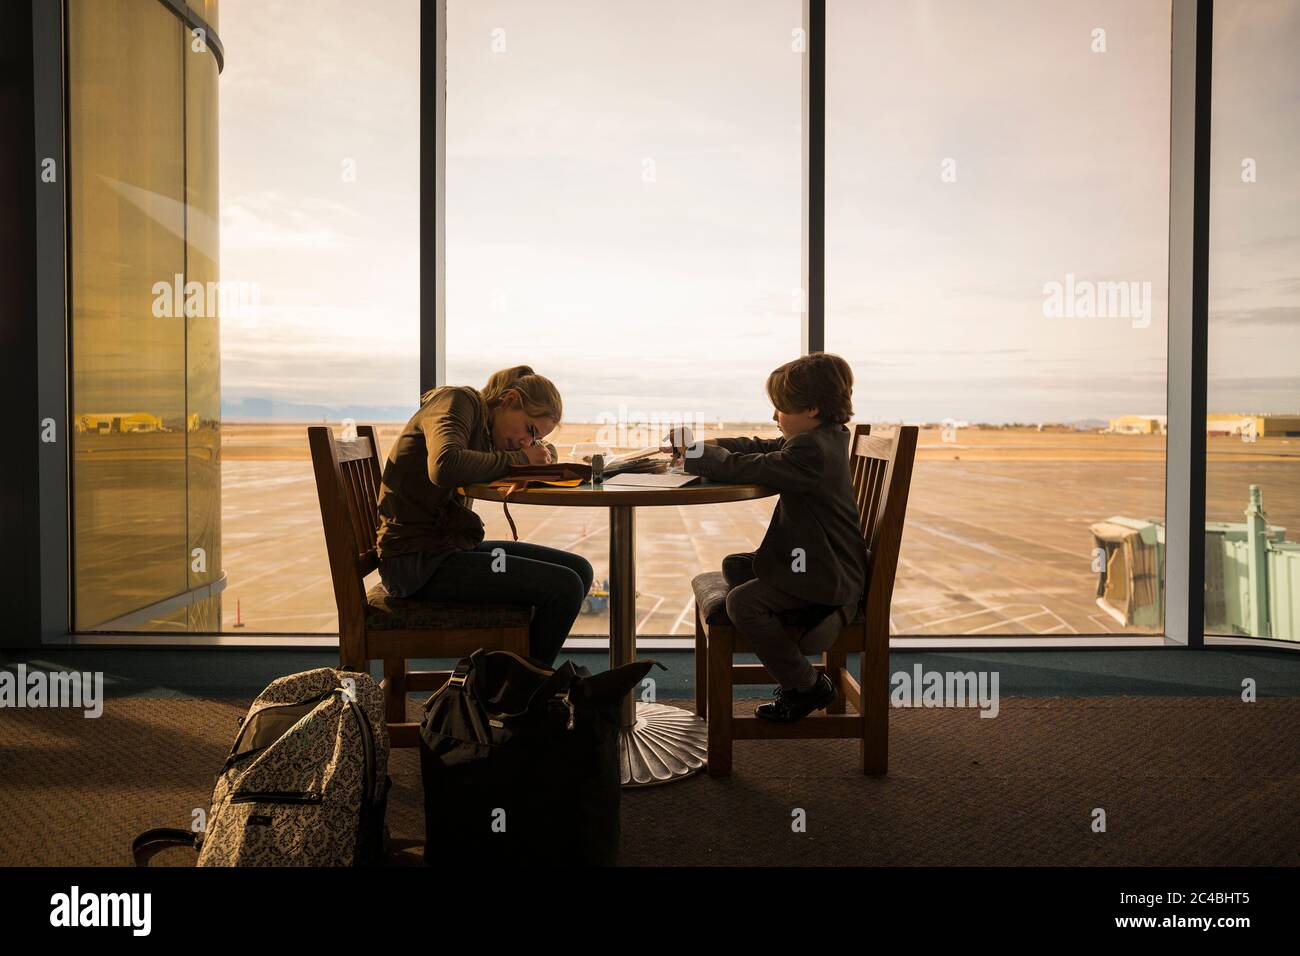 A boy and his older sister seated at a table in an airport lounge, writing and drawing. Stock Photo